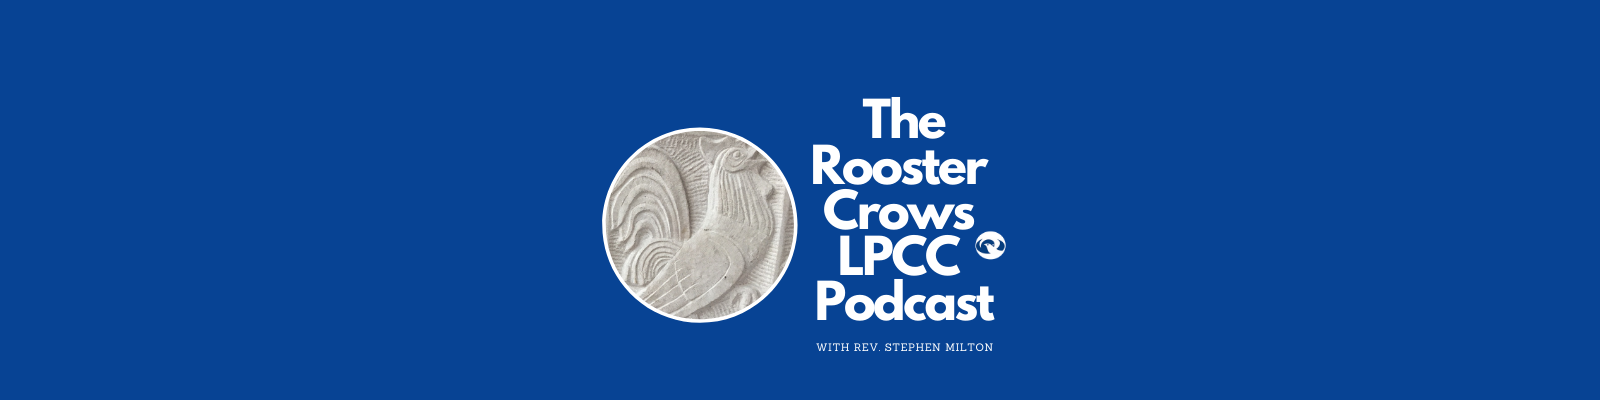 The Rooster Crows LPCC Podcast